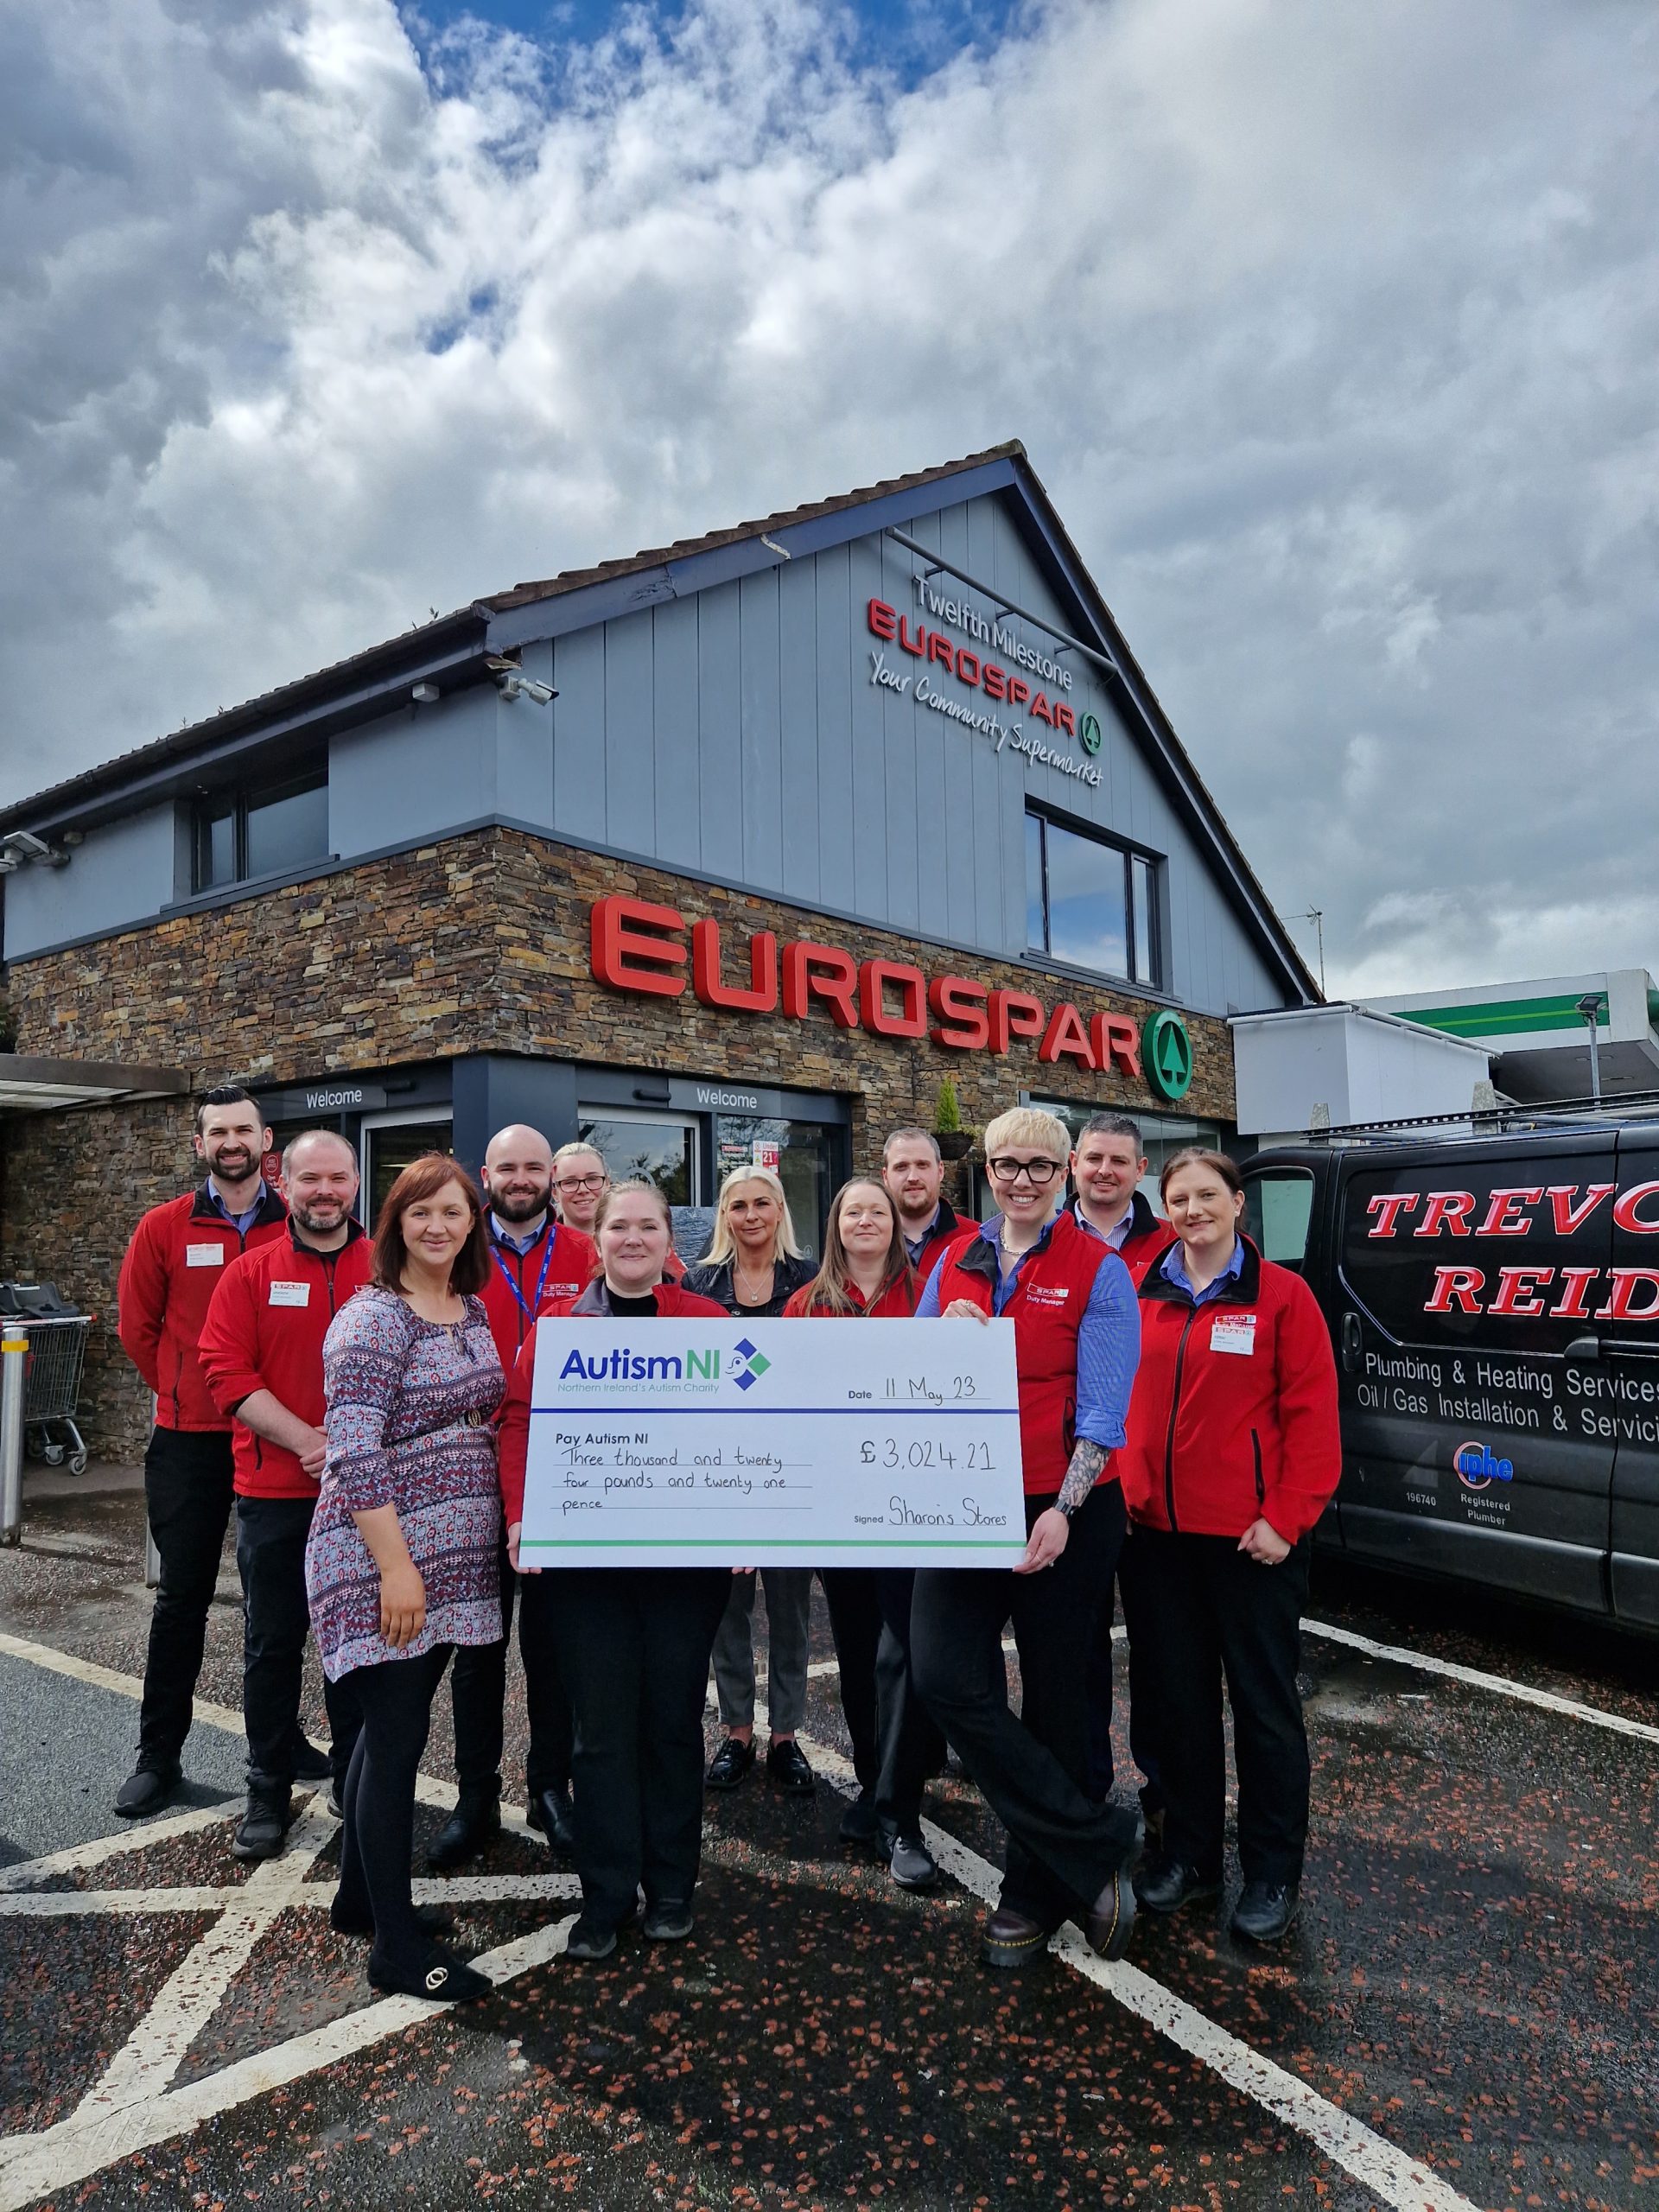 County Antrim stores raise over £3,000 for Autism NI